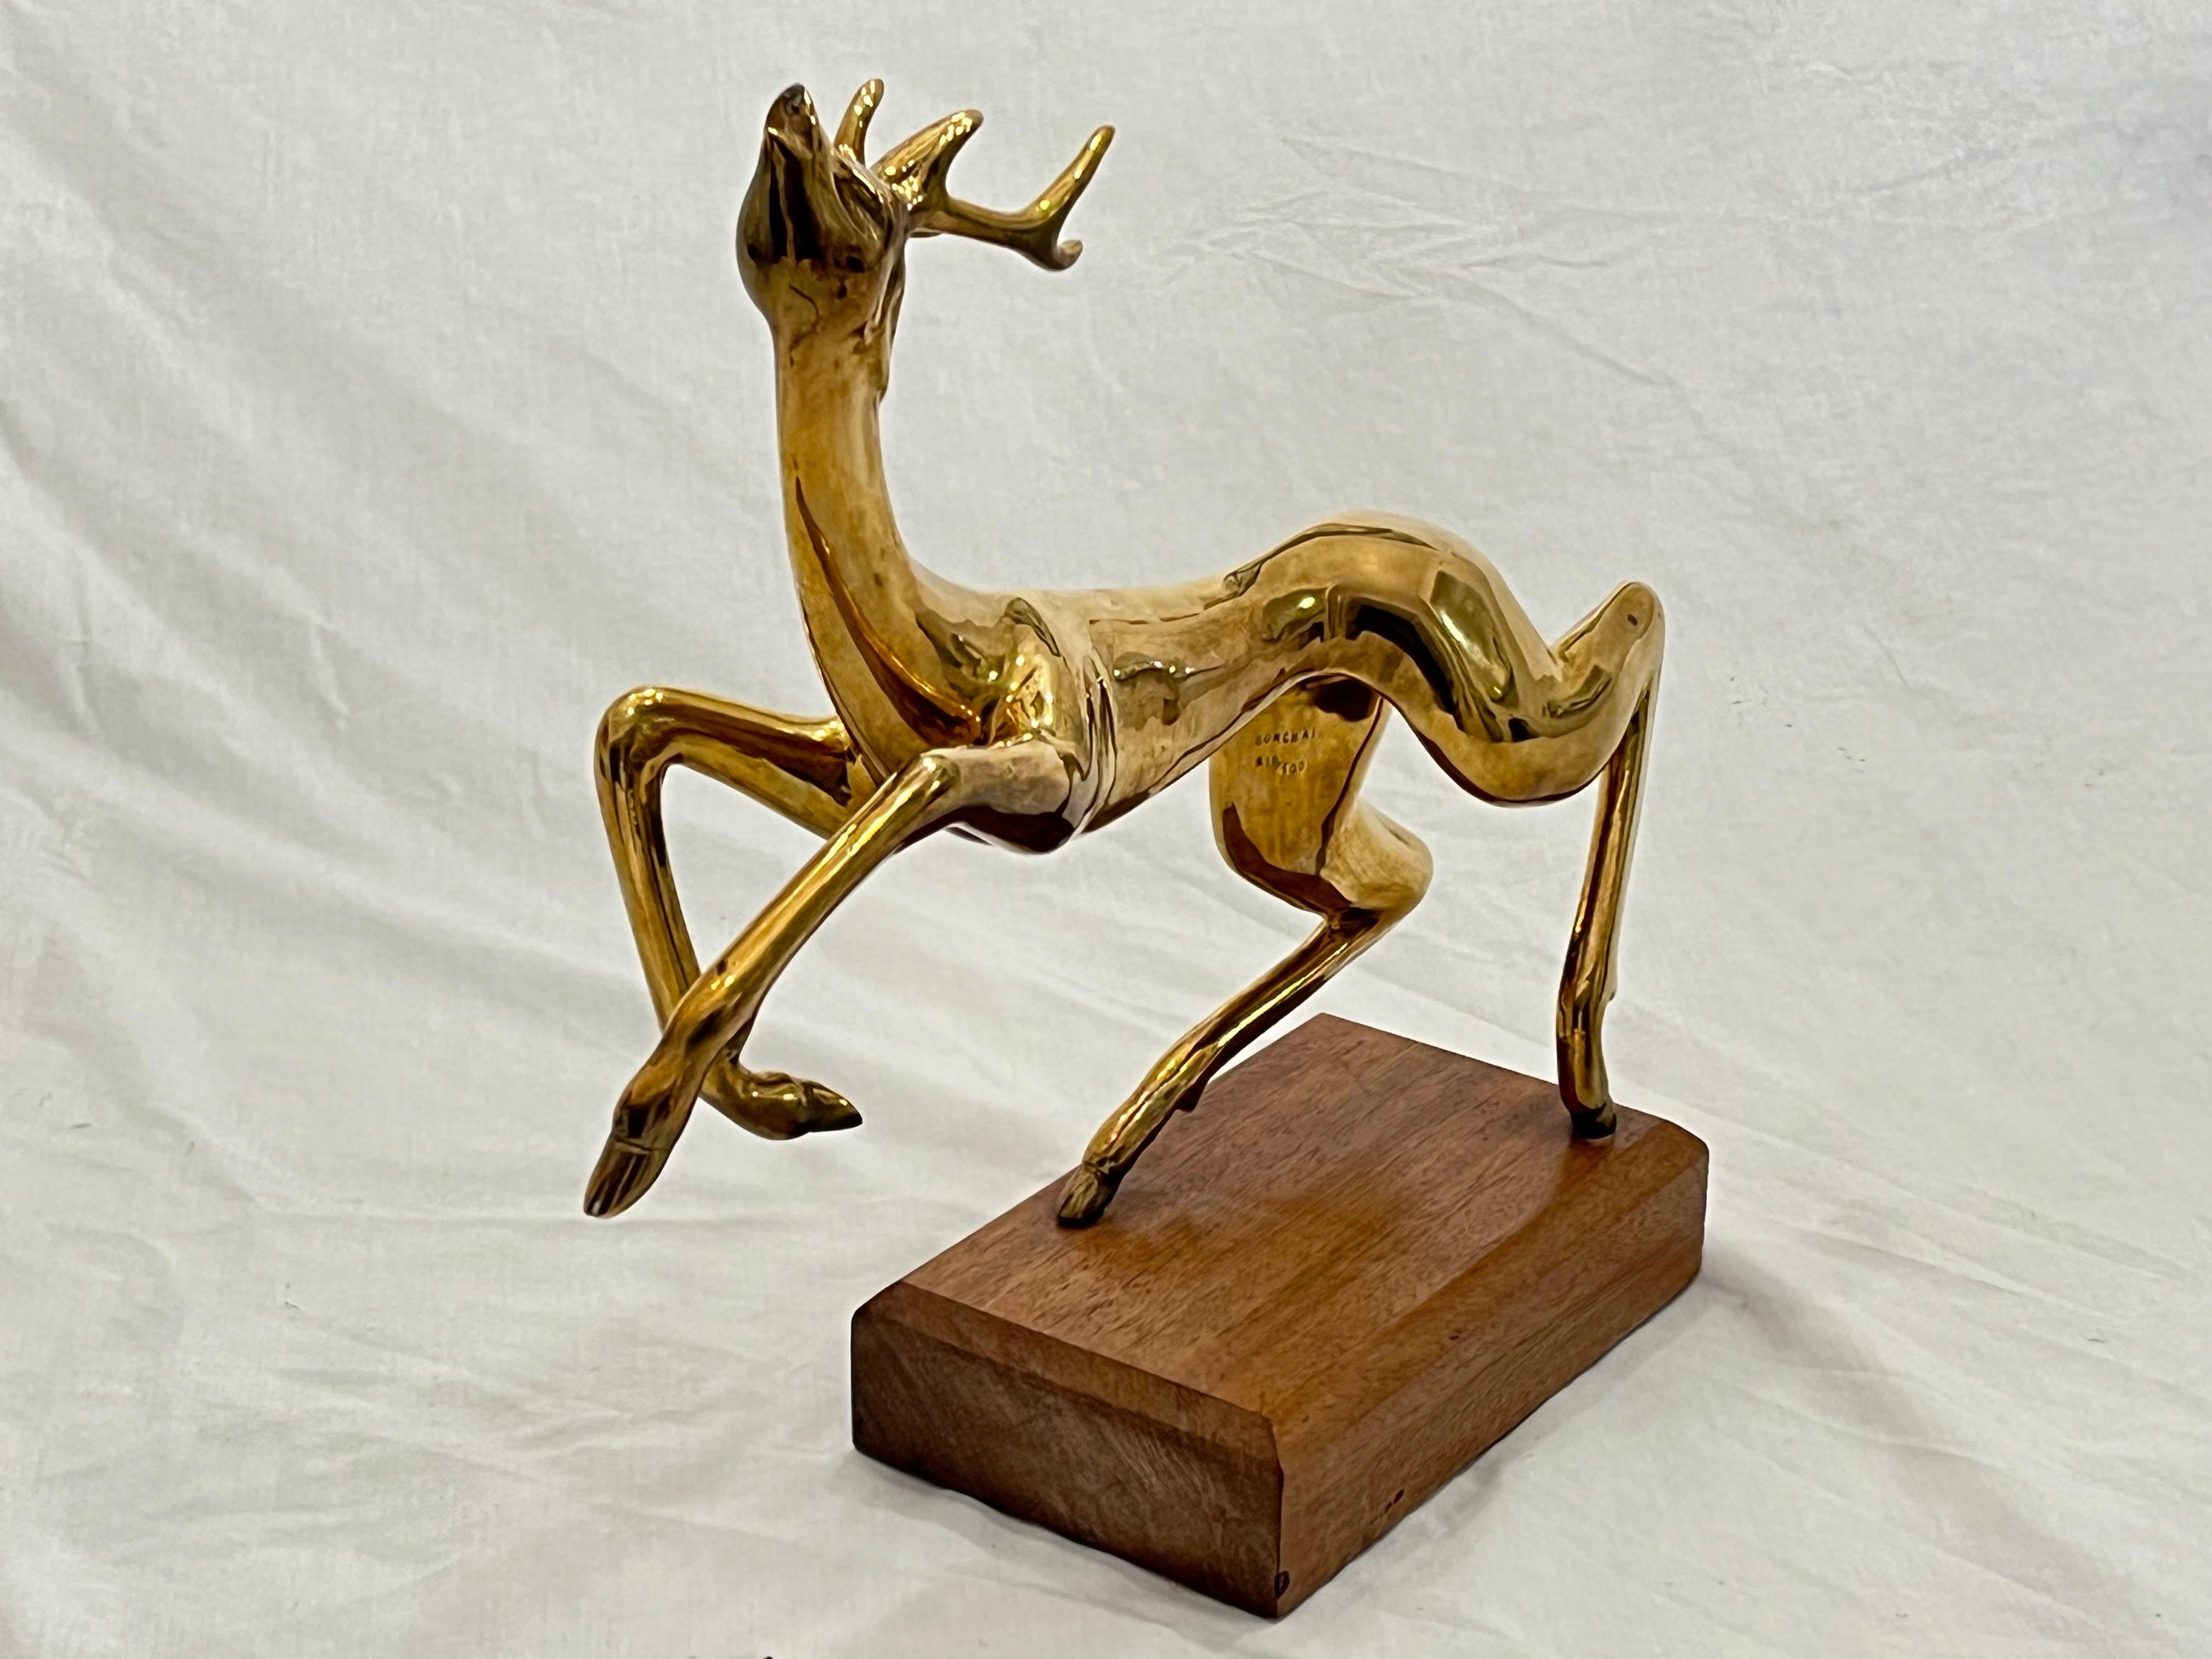 Vintage Thai Somchai Hattakitkosol Signed Solid Bronze Sculpture of Leaping Deer For Sale 3